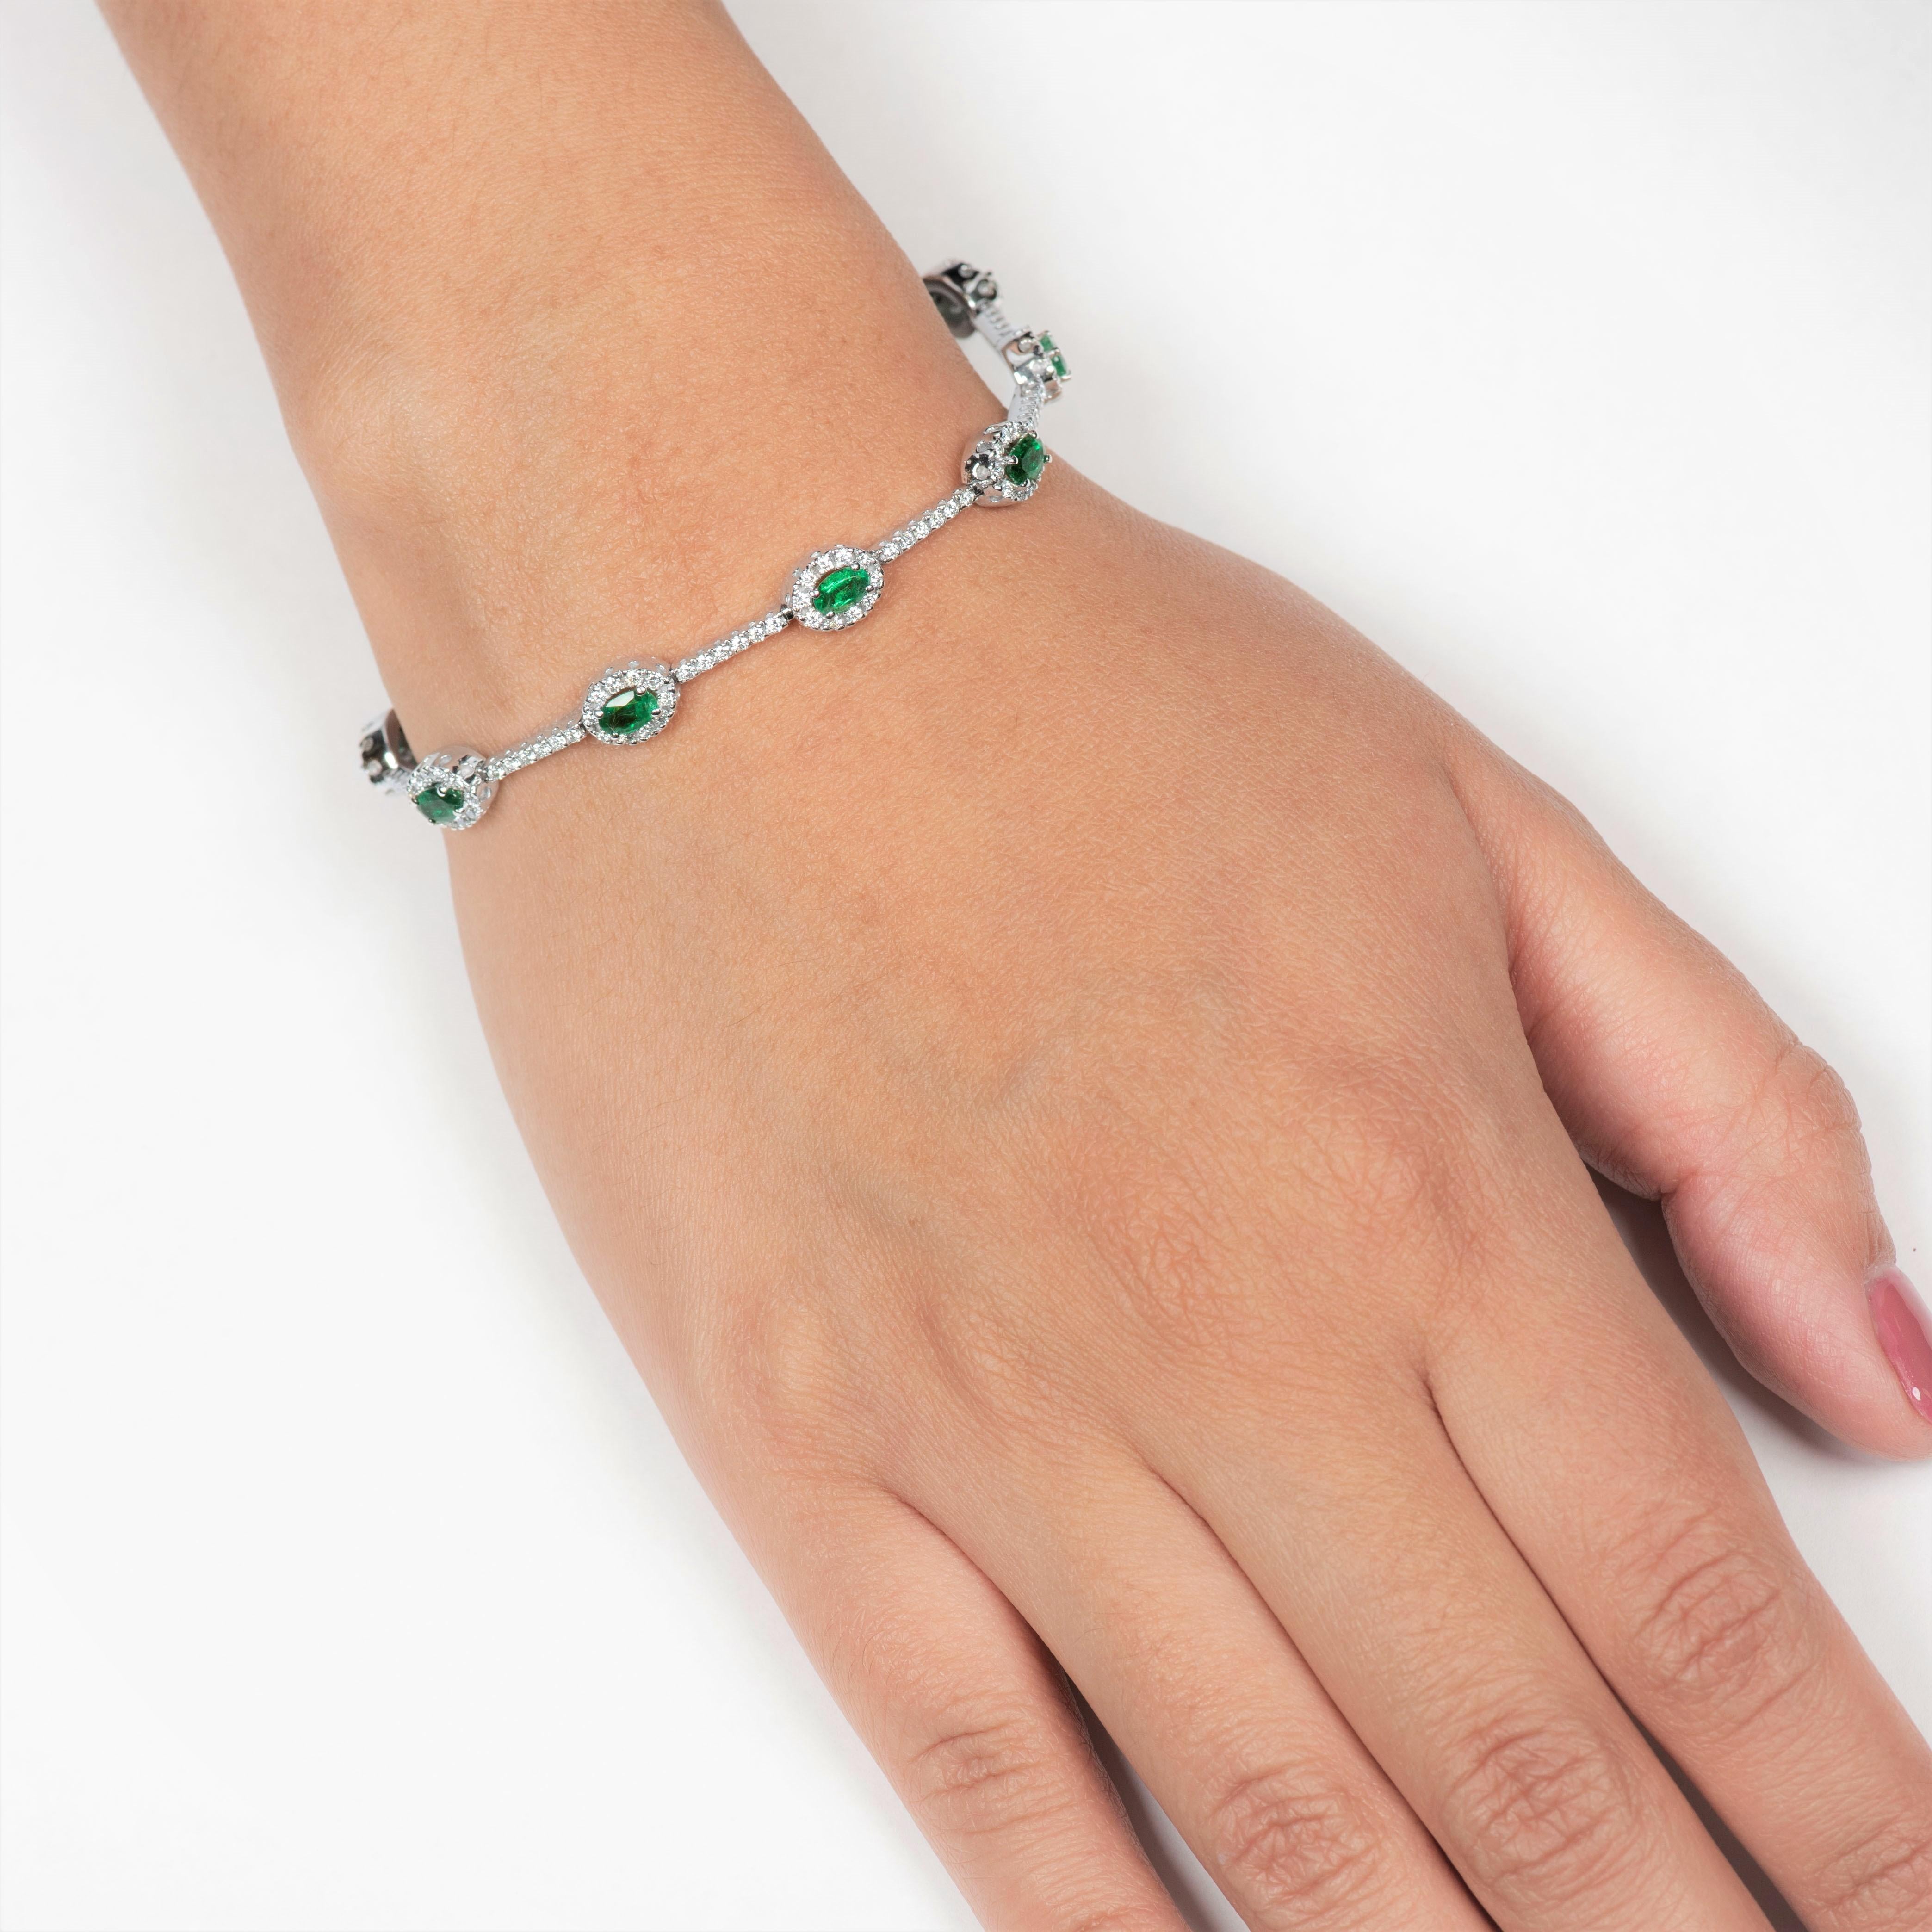 This gorgeous 2.20 carats emerald bracelet is styled with 10 perfectly matched oval cut emeralds that are formally surrounded by a halo of  1.37 carats of round brilliant cut diamonds (180 diamonds). The bracelet measures at a length of 7 inches and